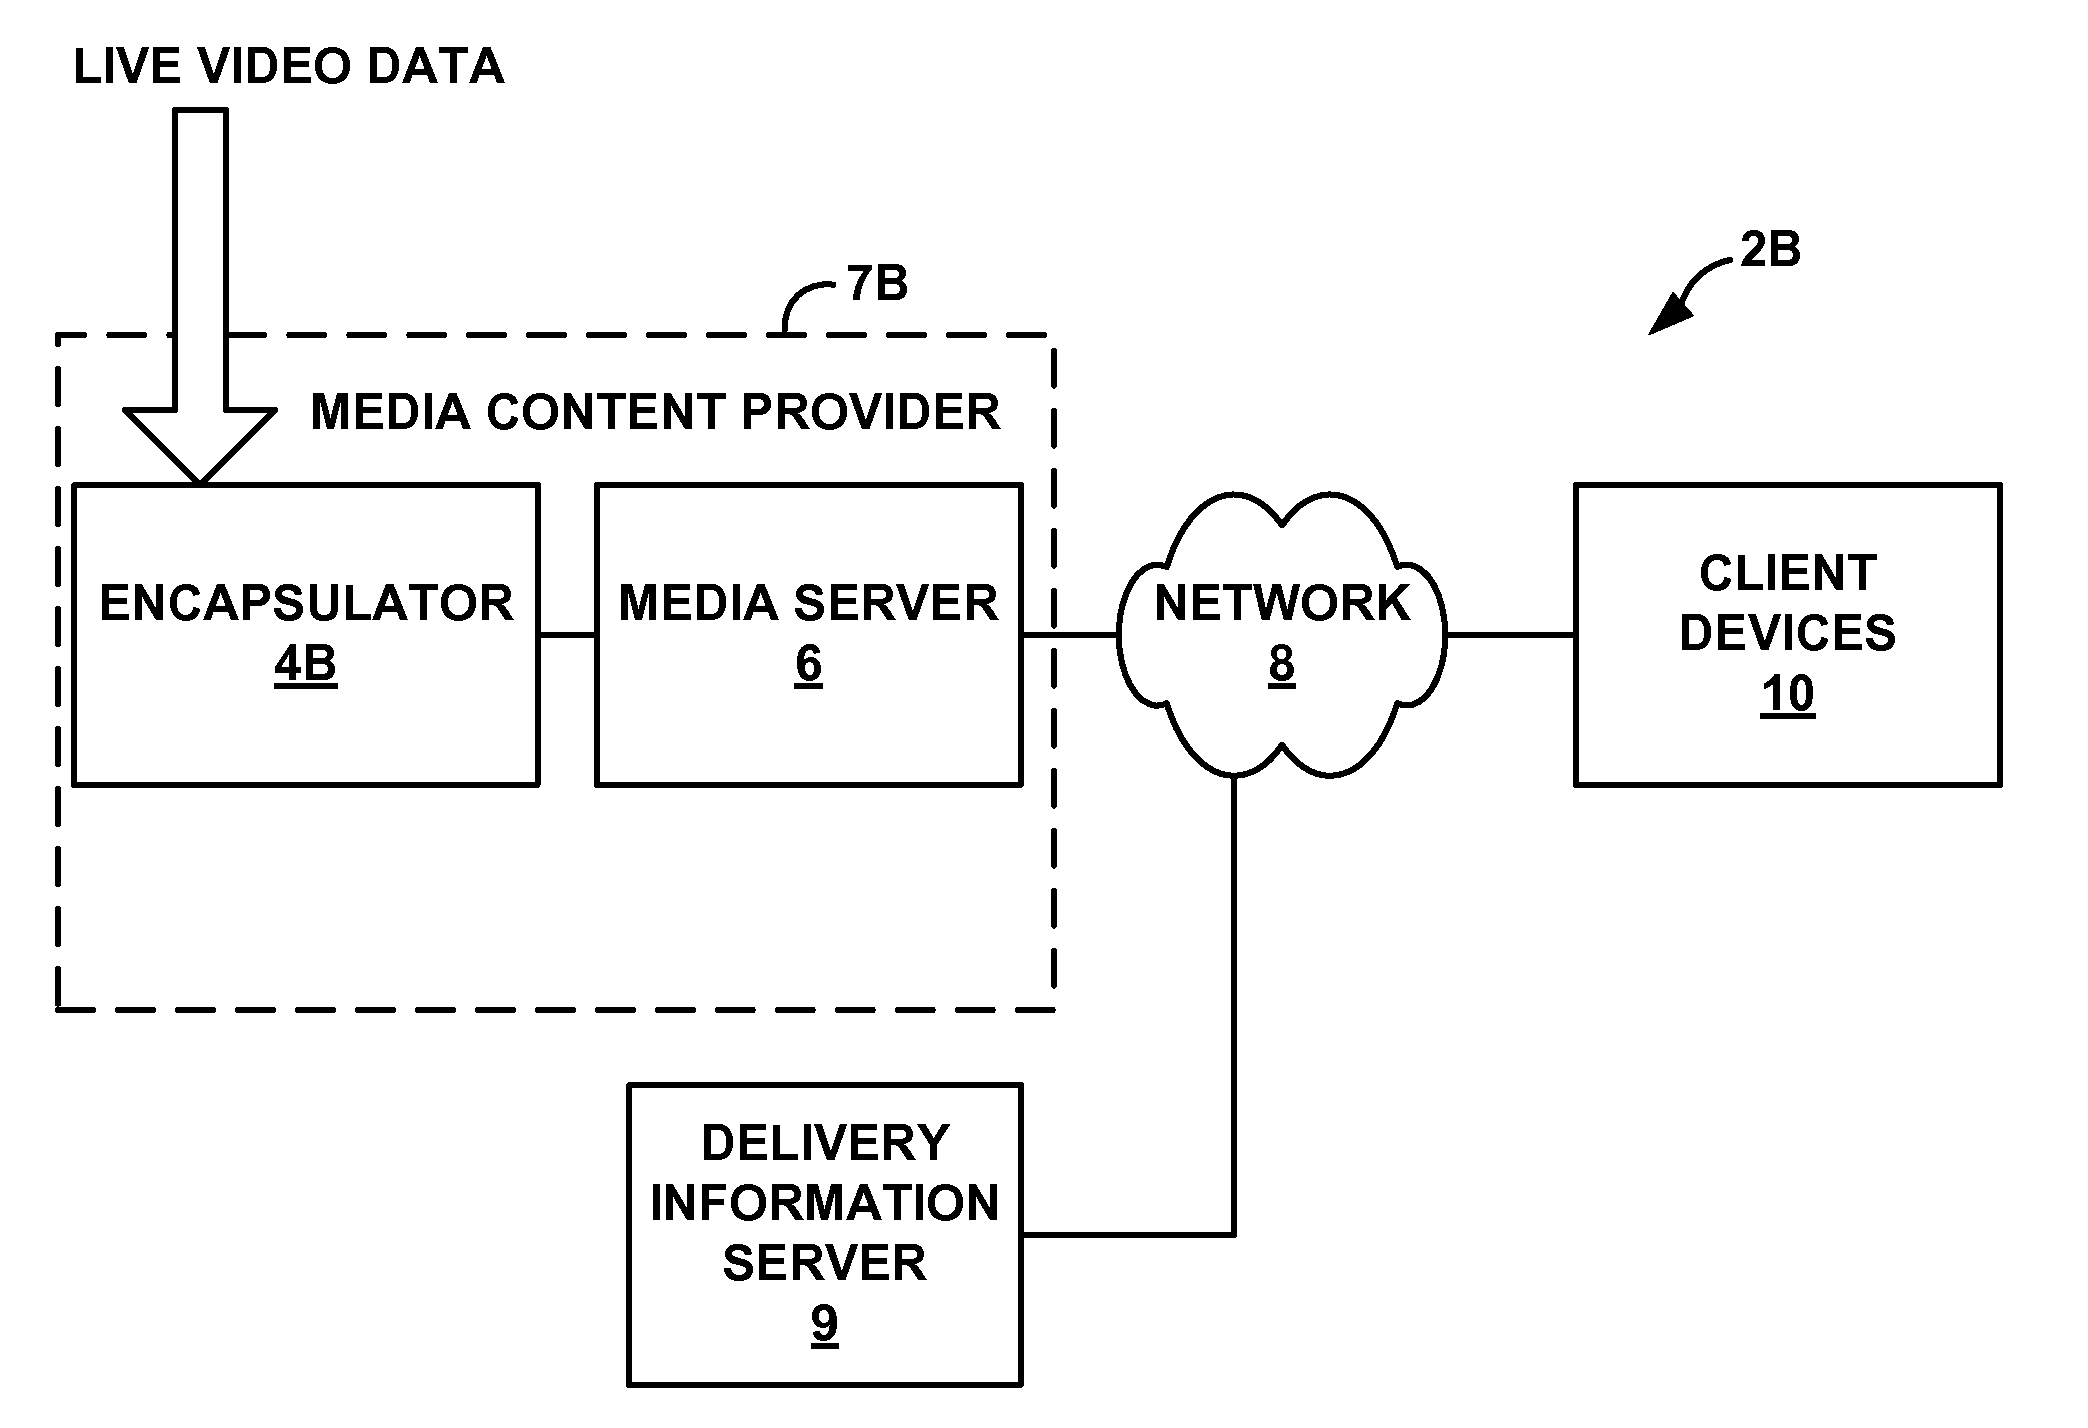 Live media delivery over a packet-based computer network